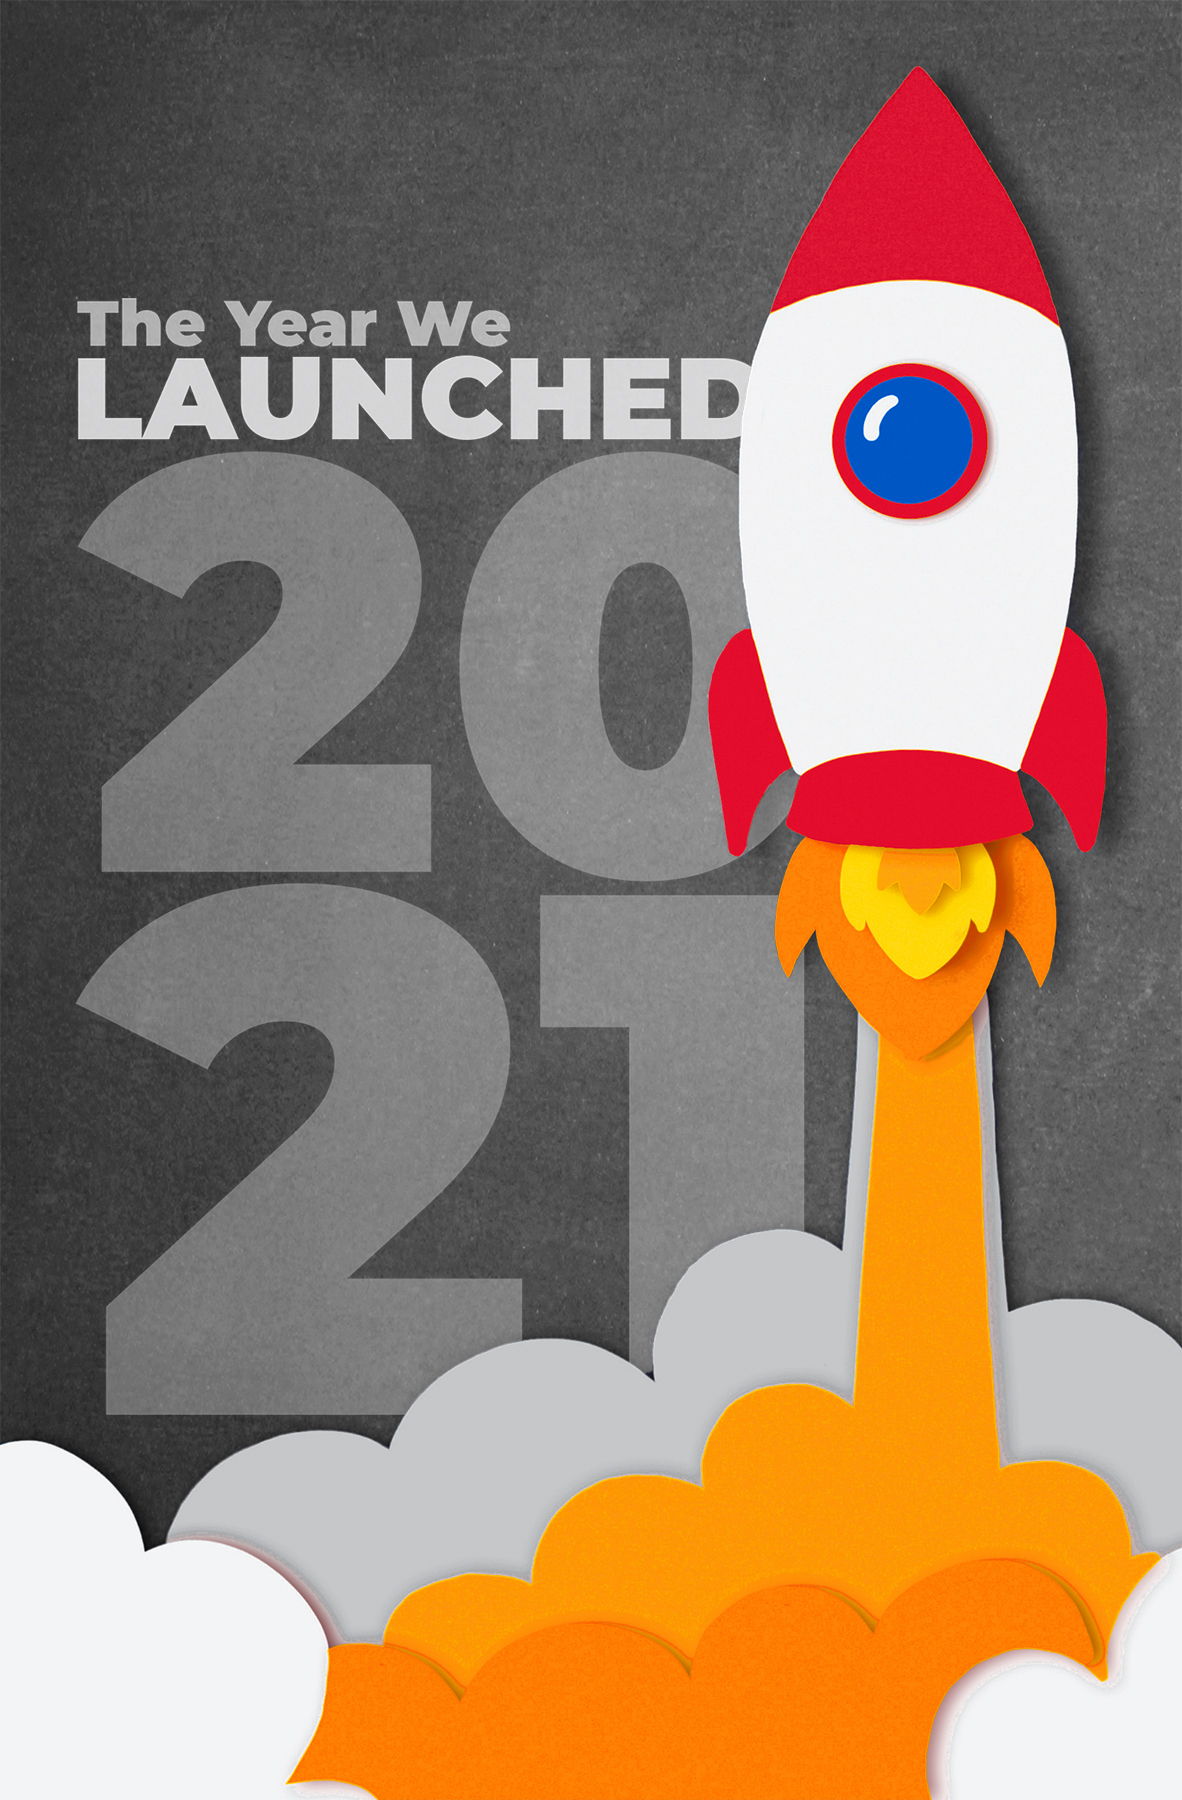 A rocketship made of layered paper, blasting off over the words, "The Year We Launched, 2021"